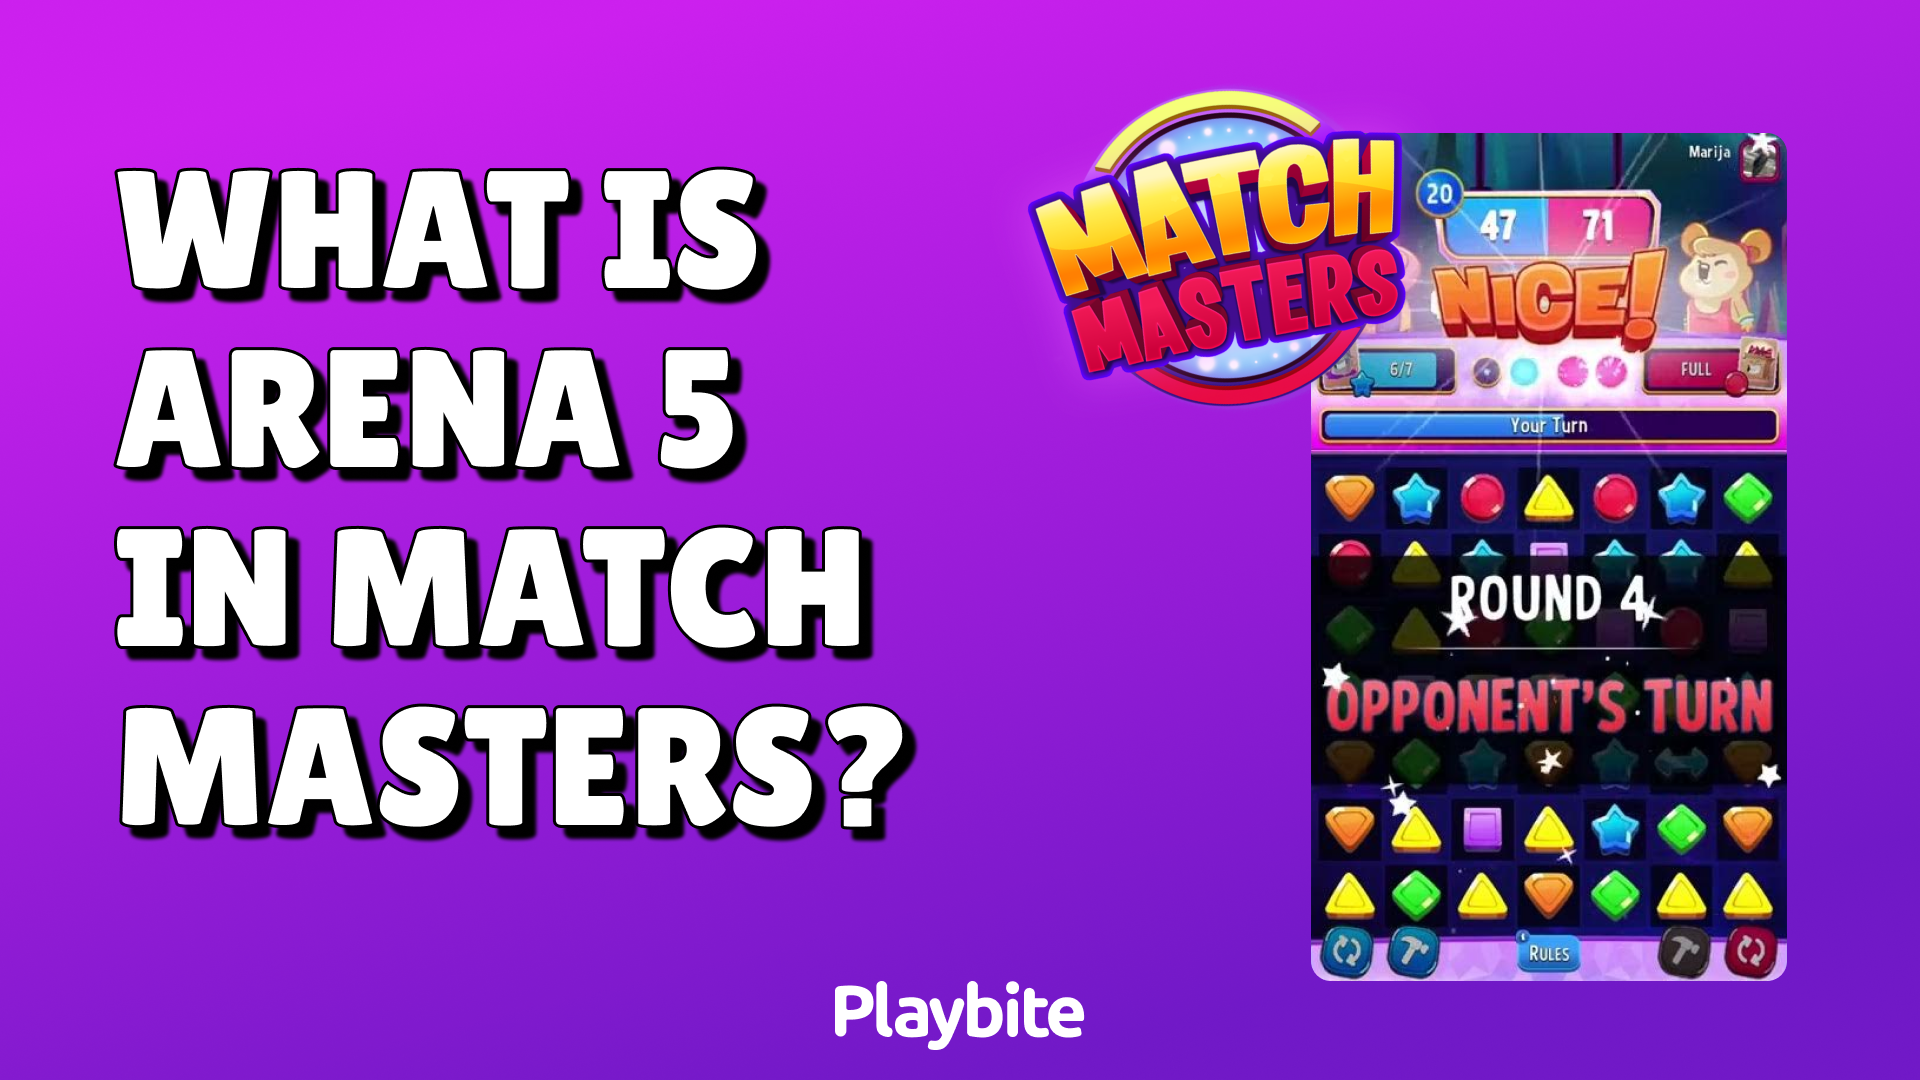 What Is Arena 5 In Match Masters?